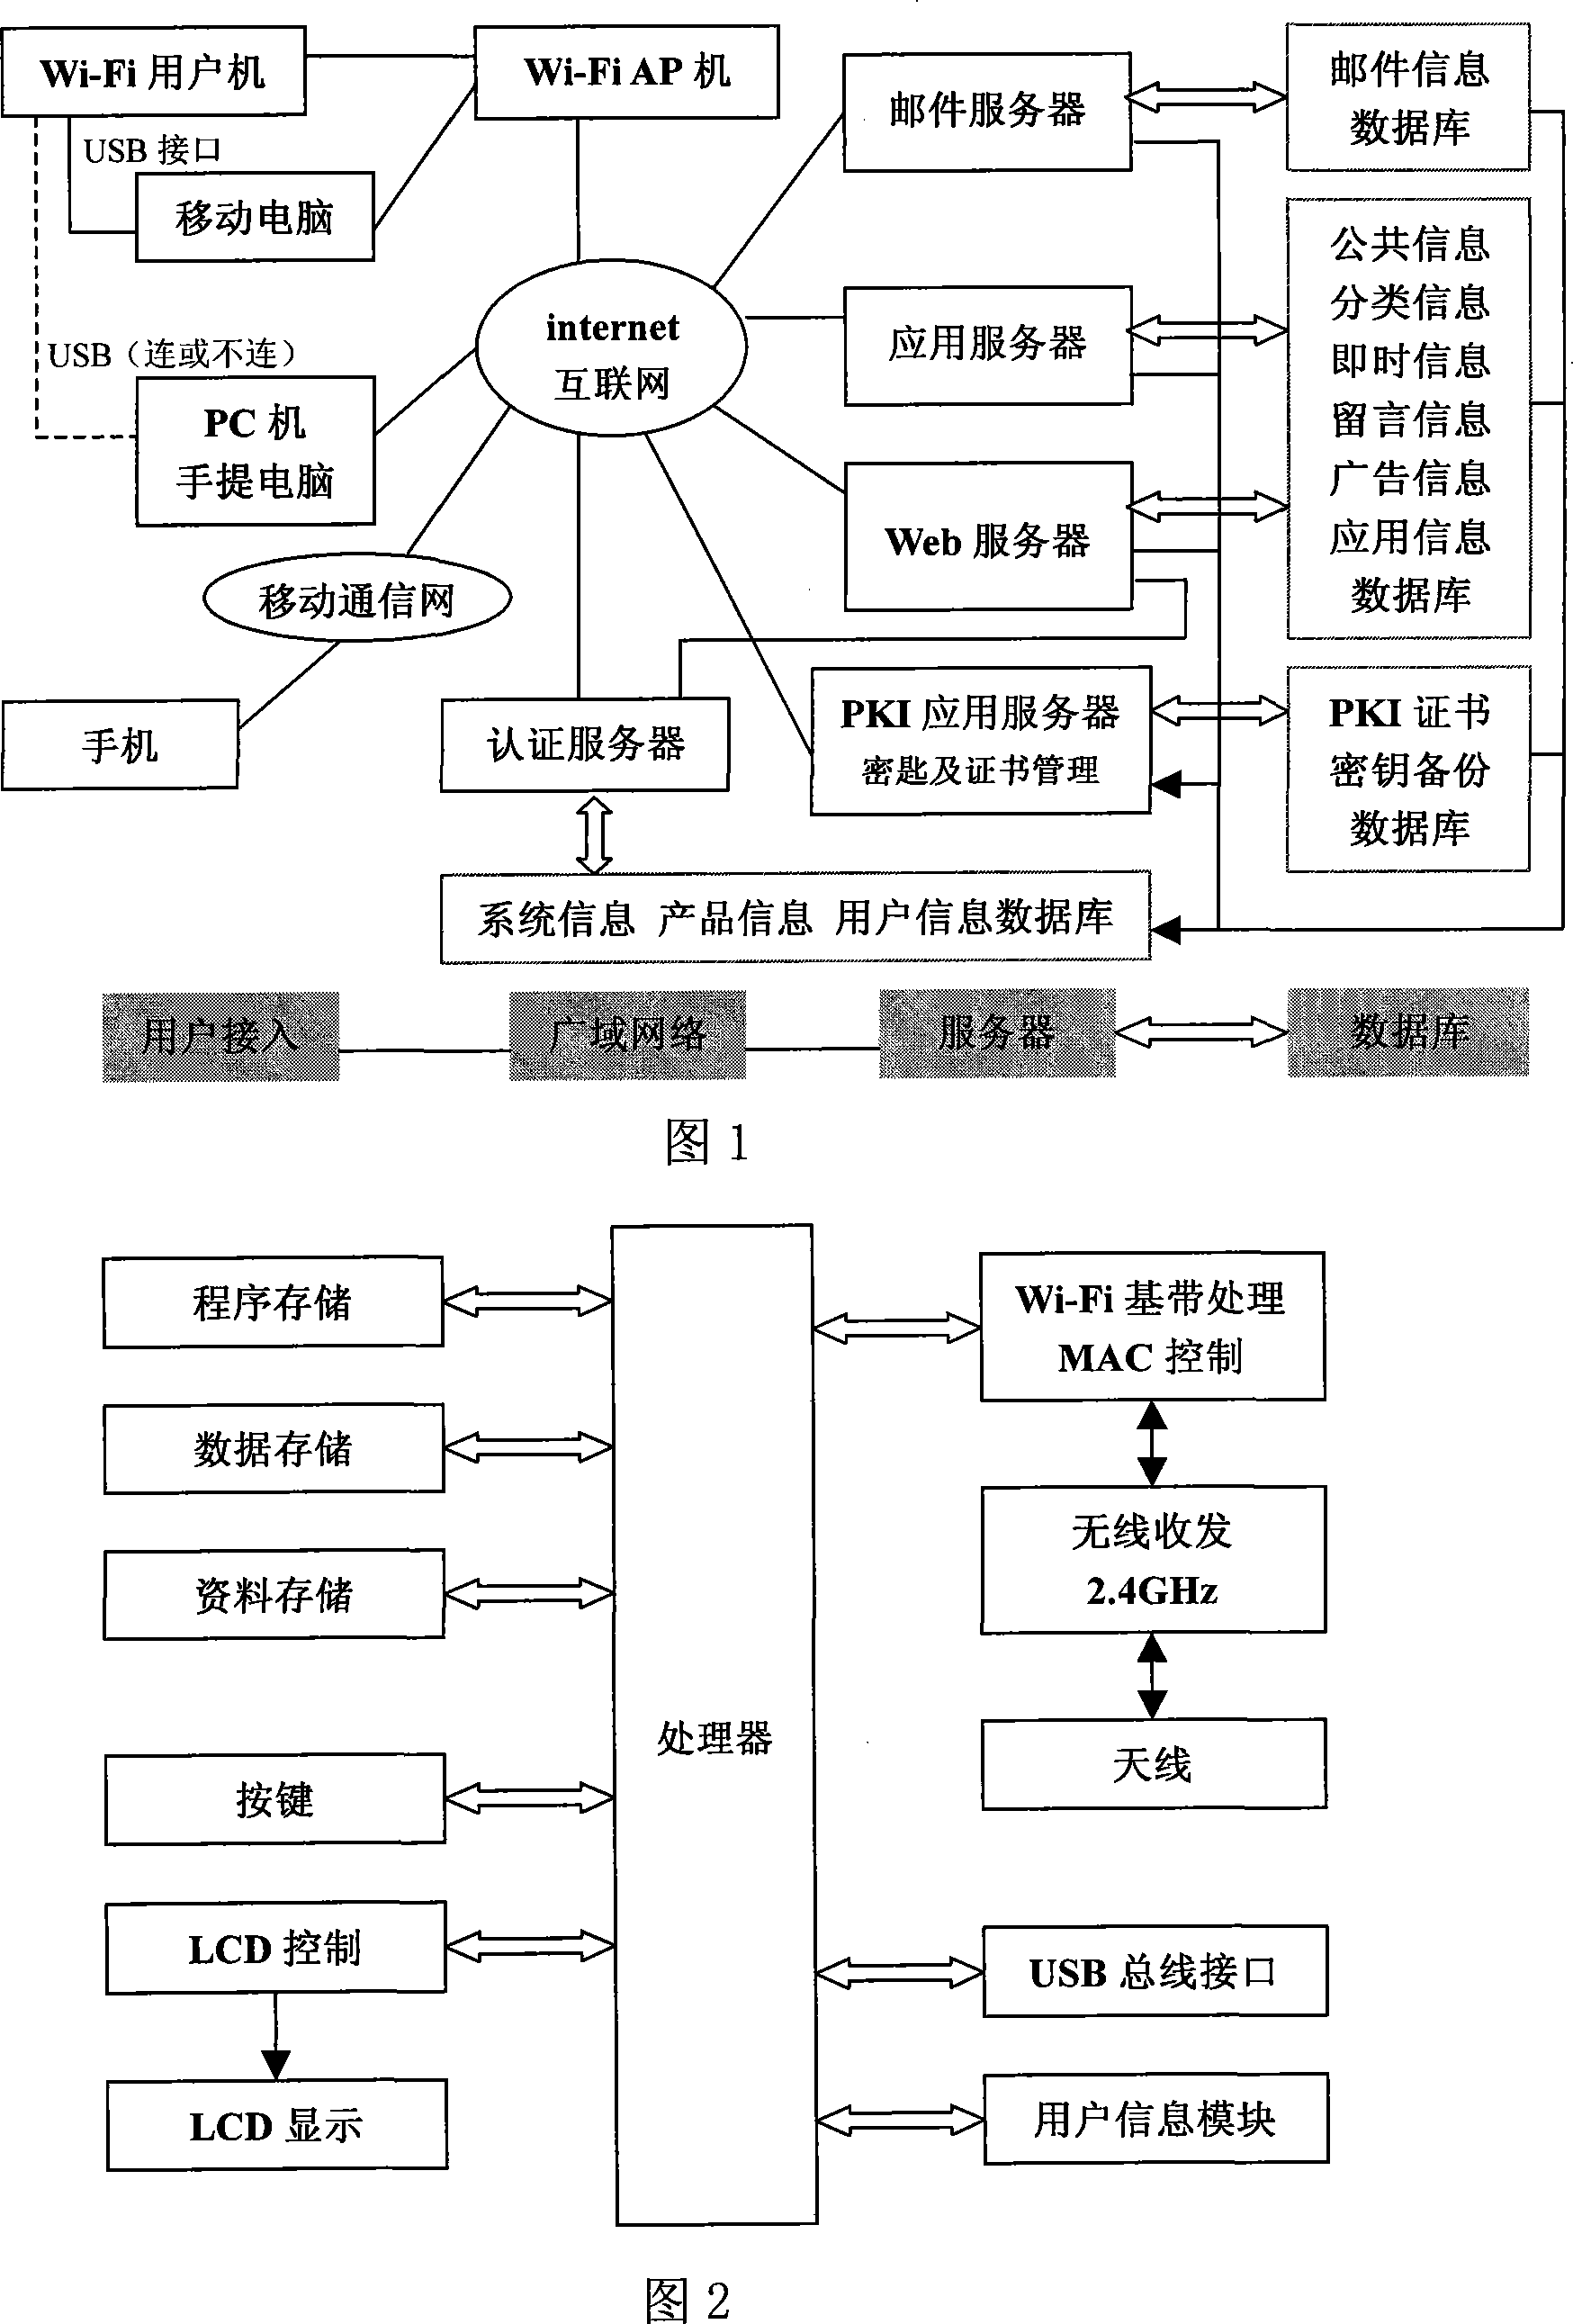 Region based layered wireless information publishing, searching and communicating application system